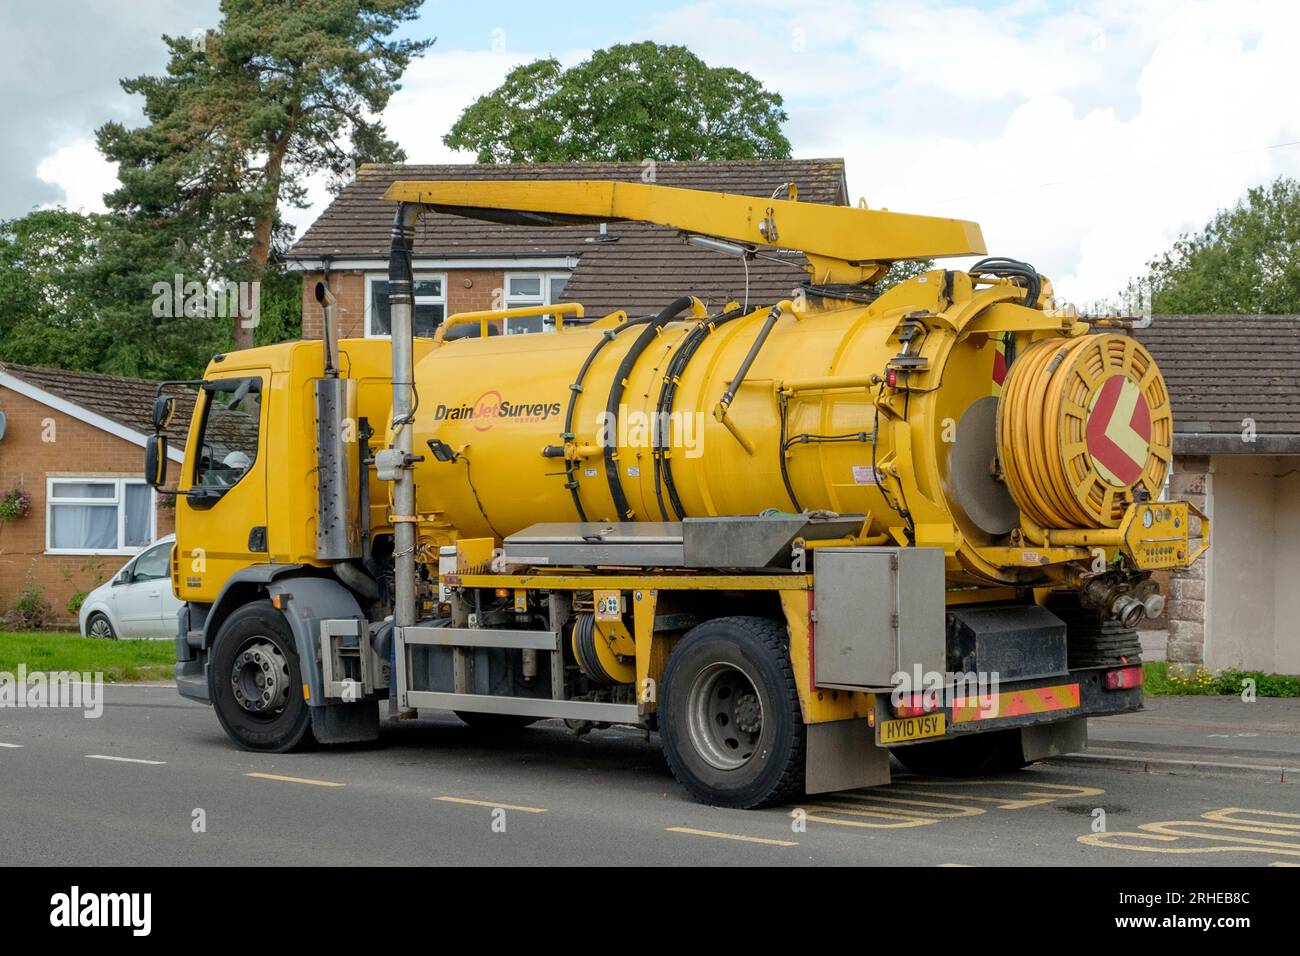 Yellow Jet drainage surveys lorry. DAF truck for sewer cleaning. Stock Photo